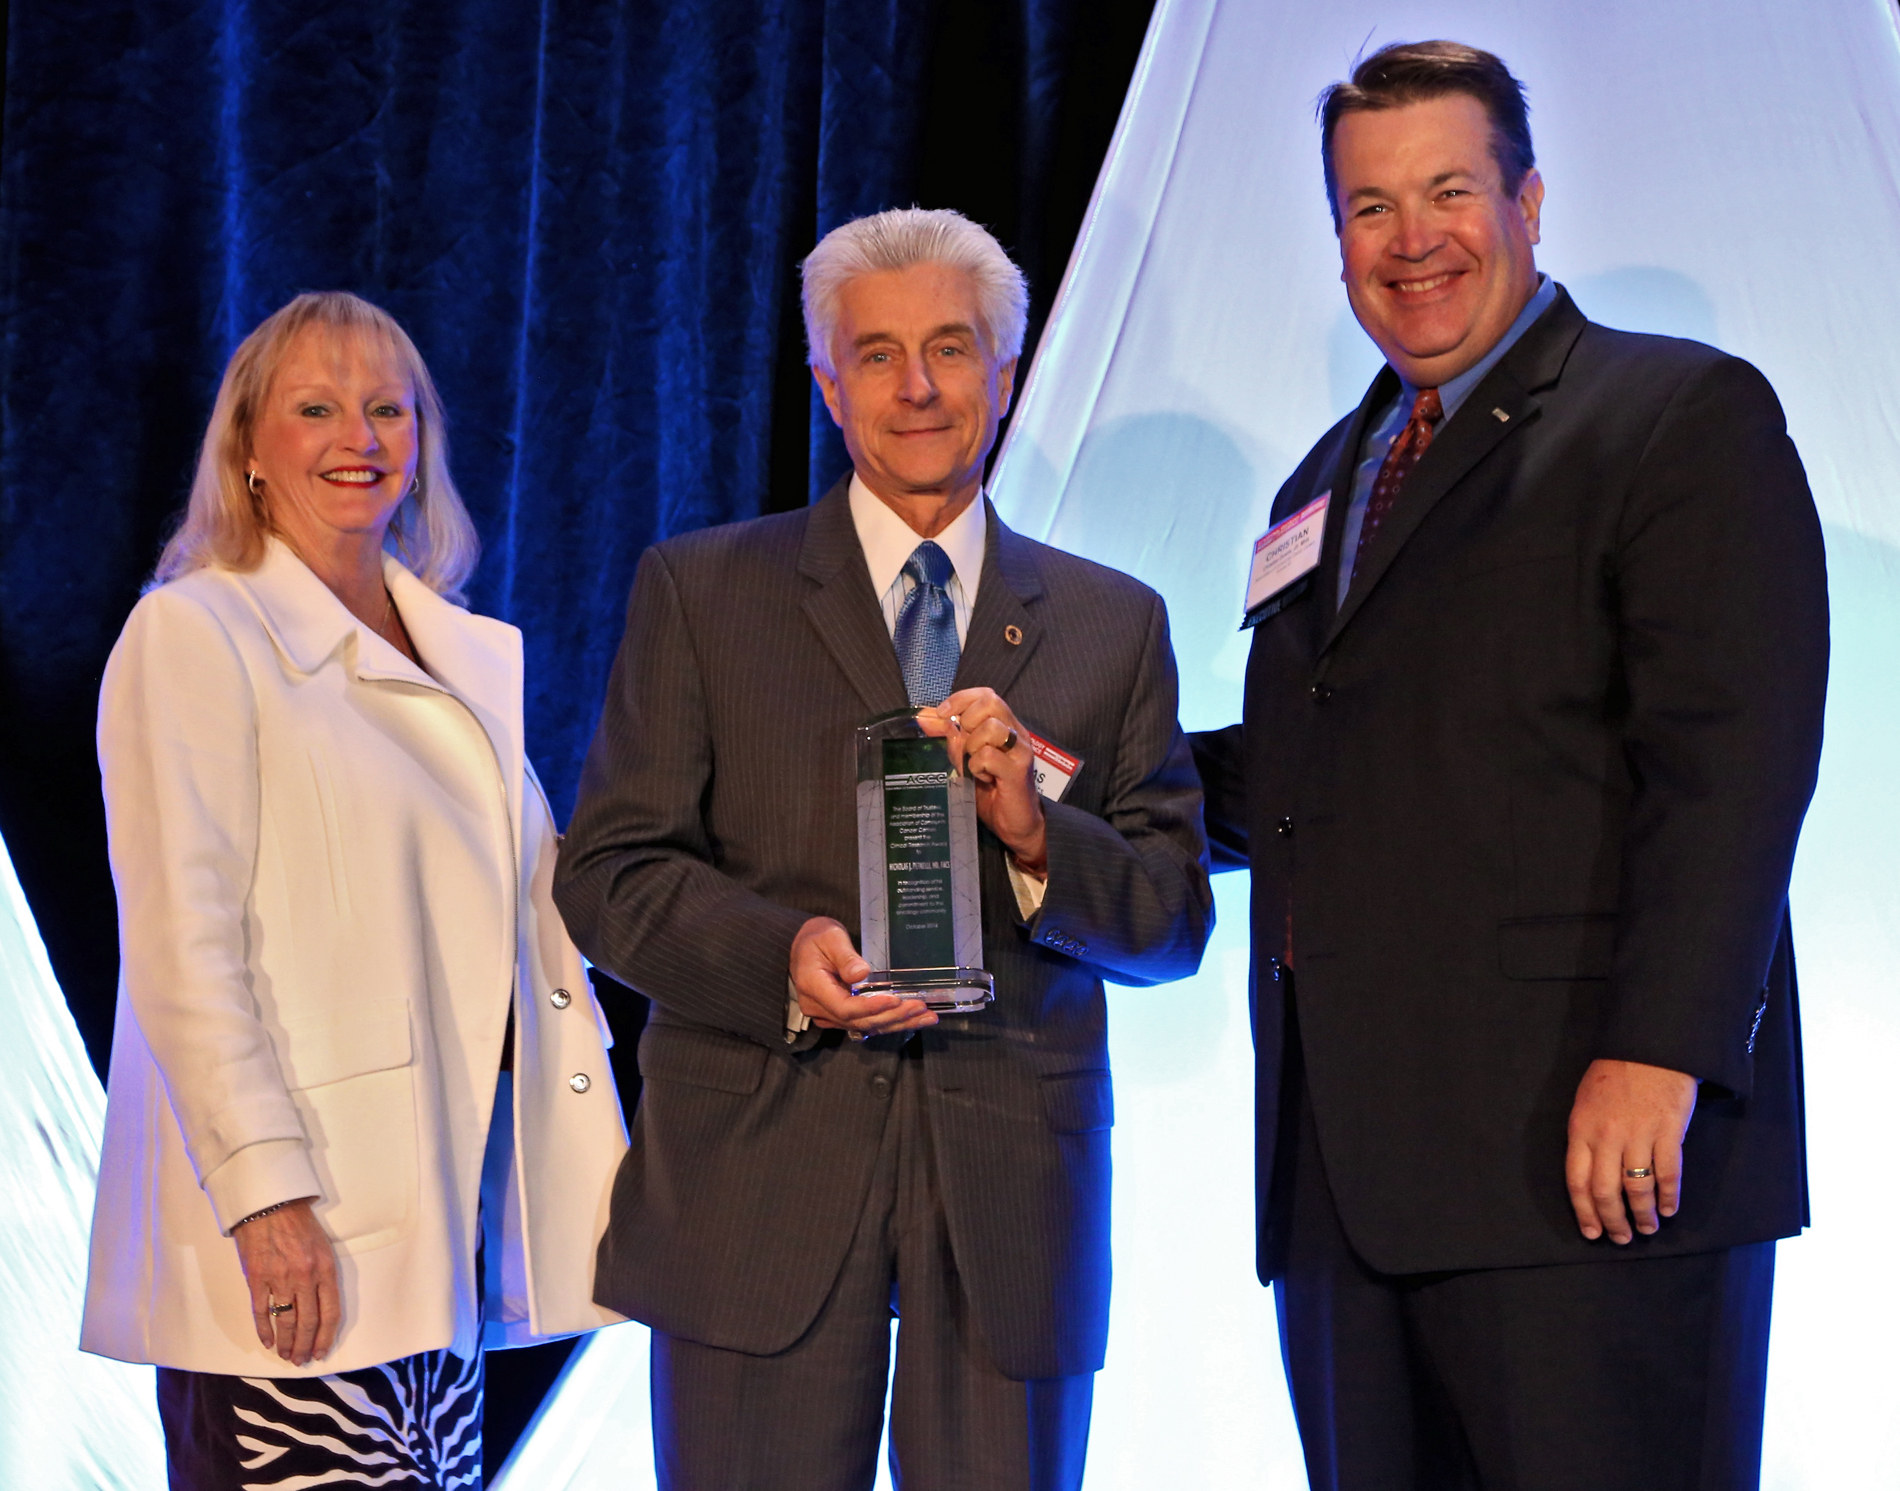 Nicholas J. Petrelli, M.D., FACS, (center) received the 2014 Clinical Research Award from the Association of Community Cancer Centers.